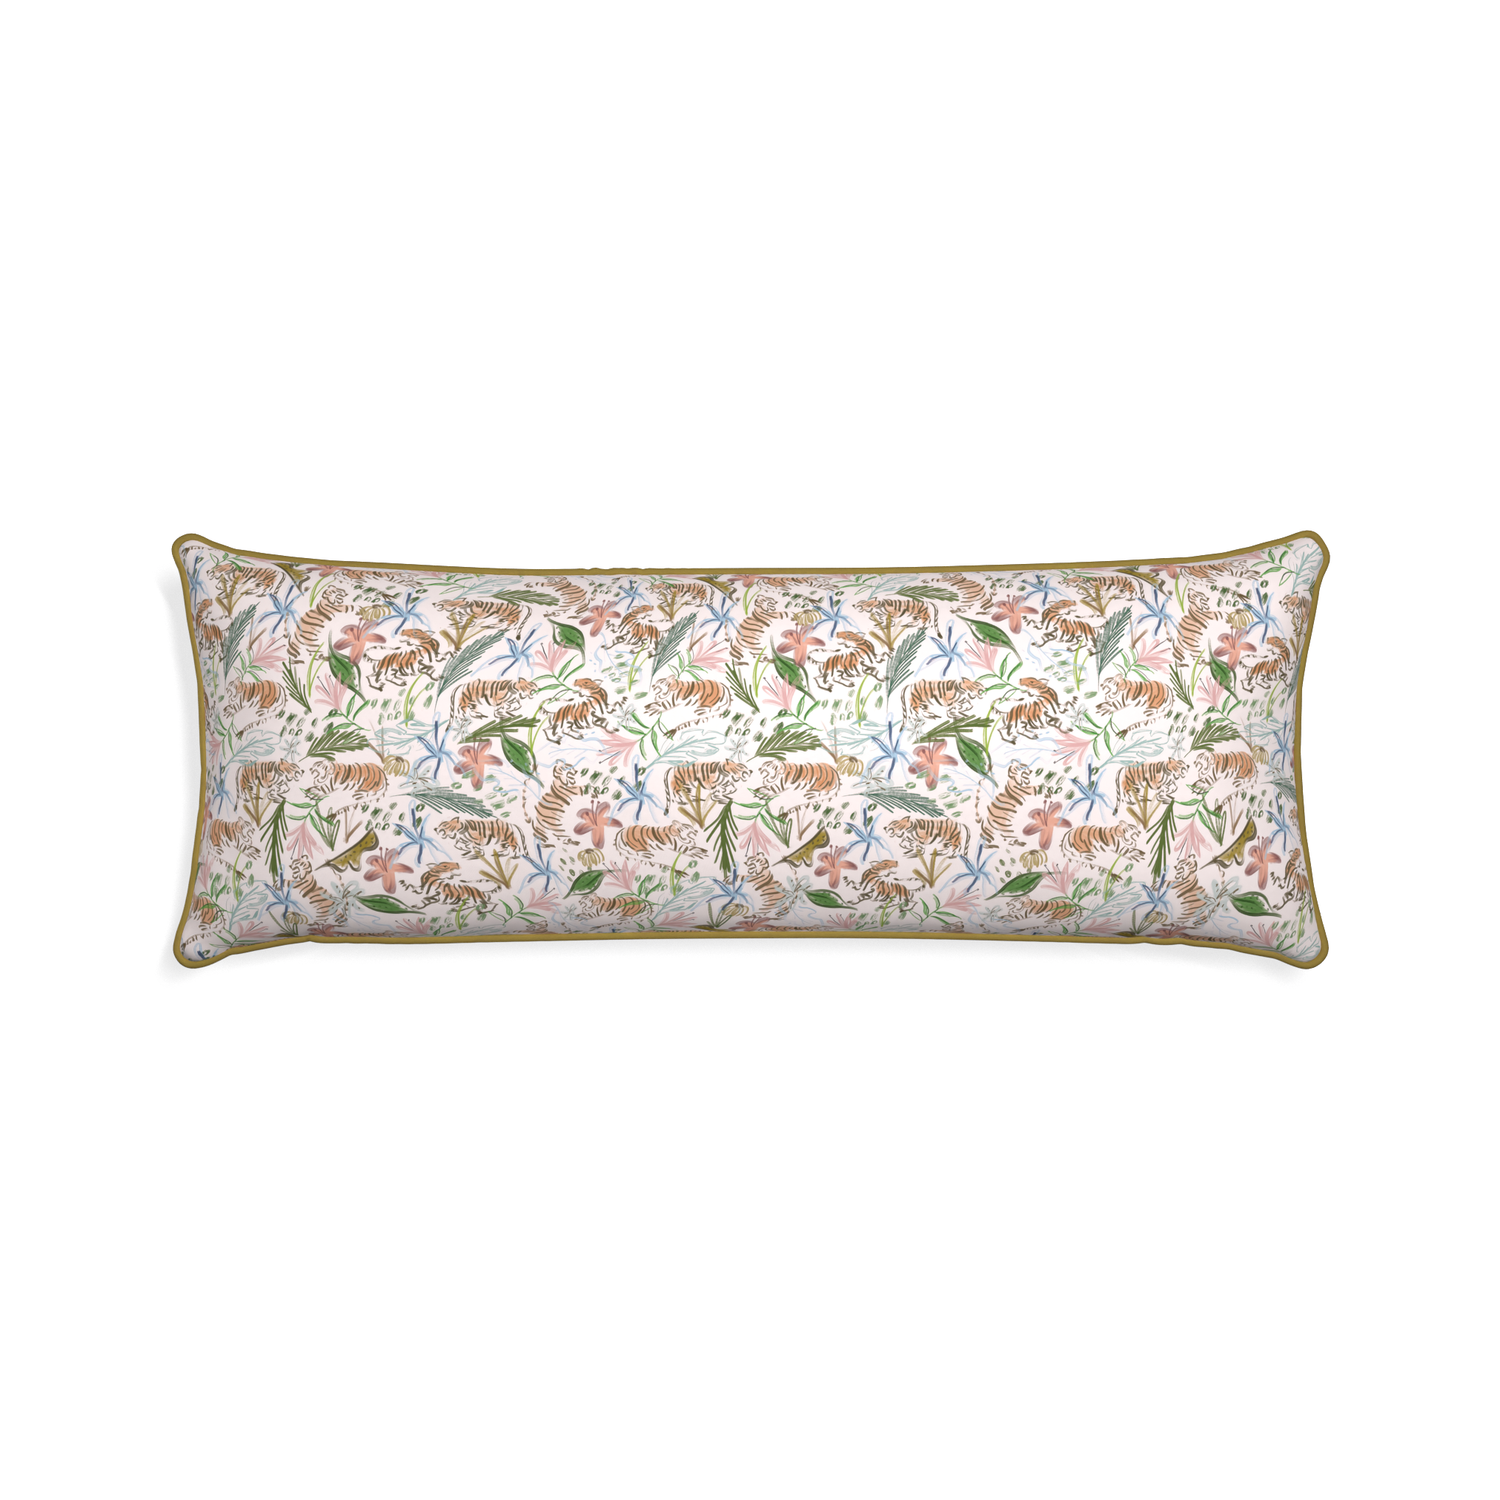 Xl-lumbar frida pink custom pink chinoiserie tigerpillow with c piping on white background